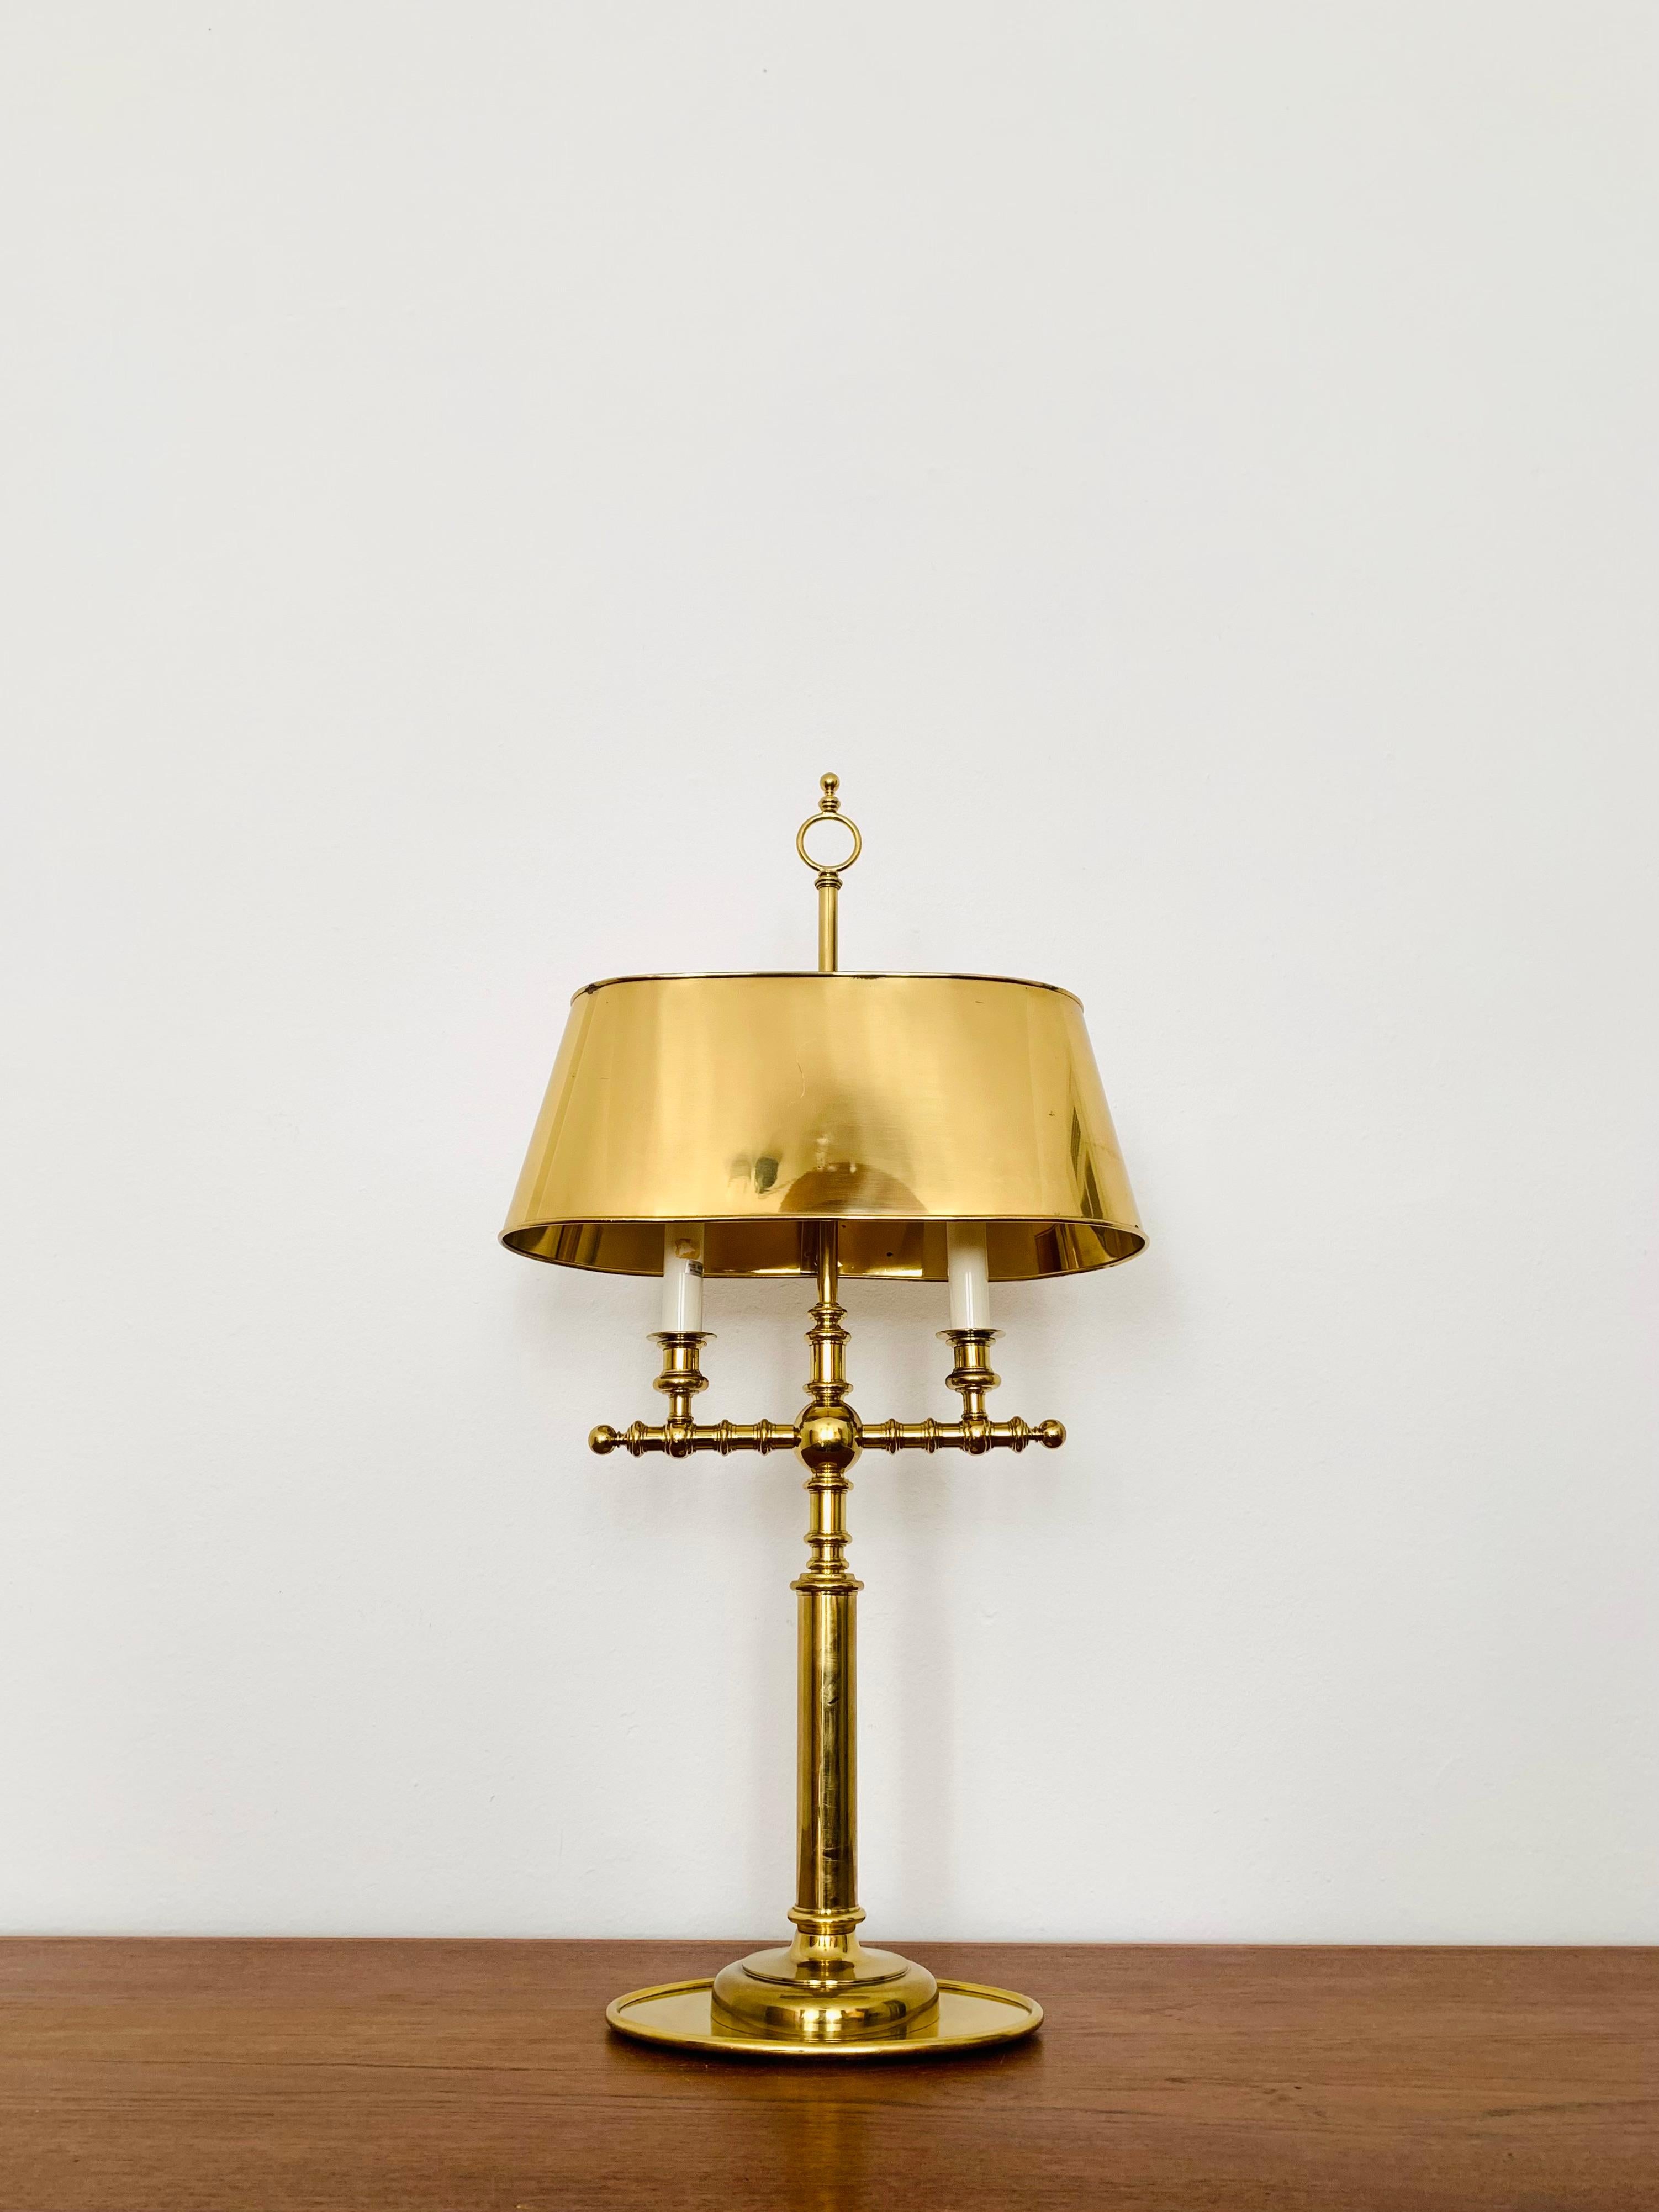 Impressive brass table lamp from the 1960s.
Exceptionally successful design and very high -quality workmanship.
The lampshade is adjustable in height.
A very noble lamp and an enrichment for every home.

Condition:

Very good vintage condition with